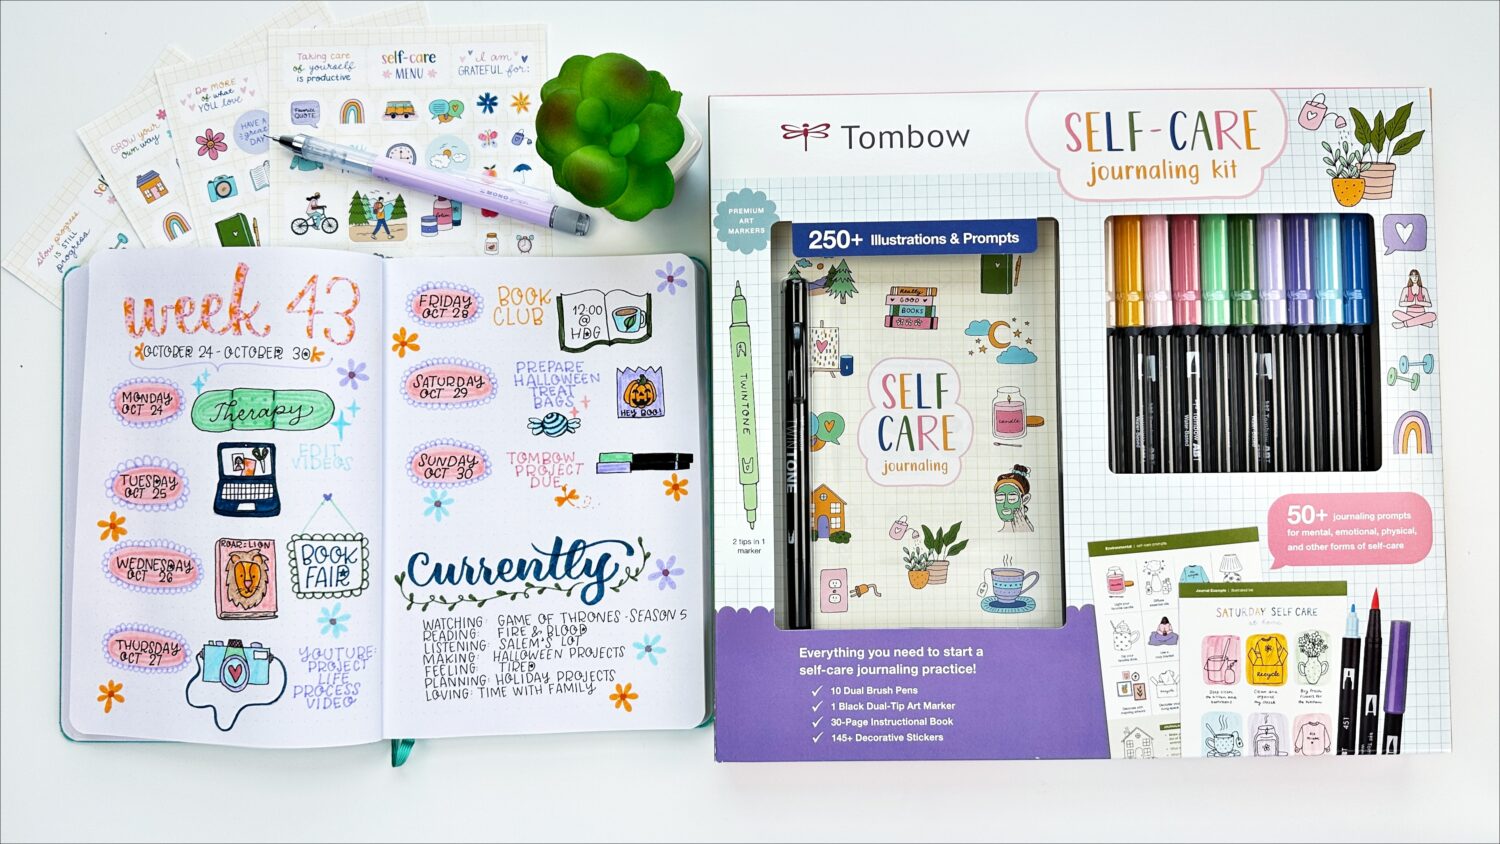 http://blog.tombowusa.com/wp-content/uploads/files/Check-Out-This-Awesome-Gift-Idea-The-NEW-Tombow-Self-Care-Journaling-Kit-003-1500x844.jpeg